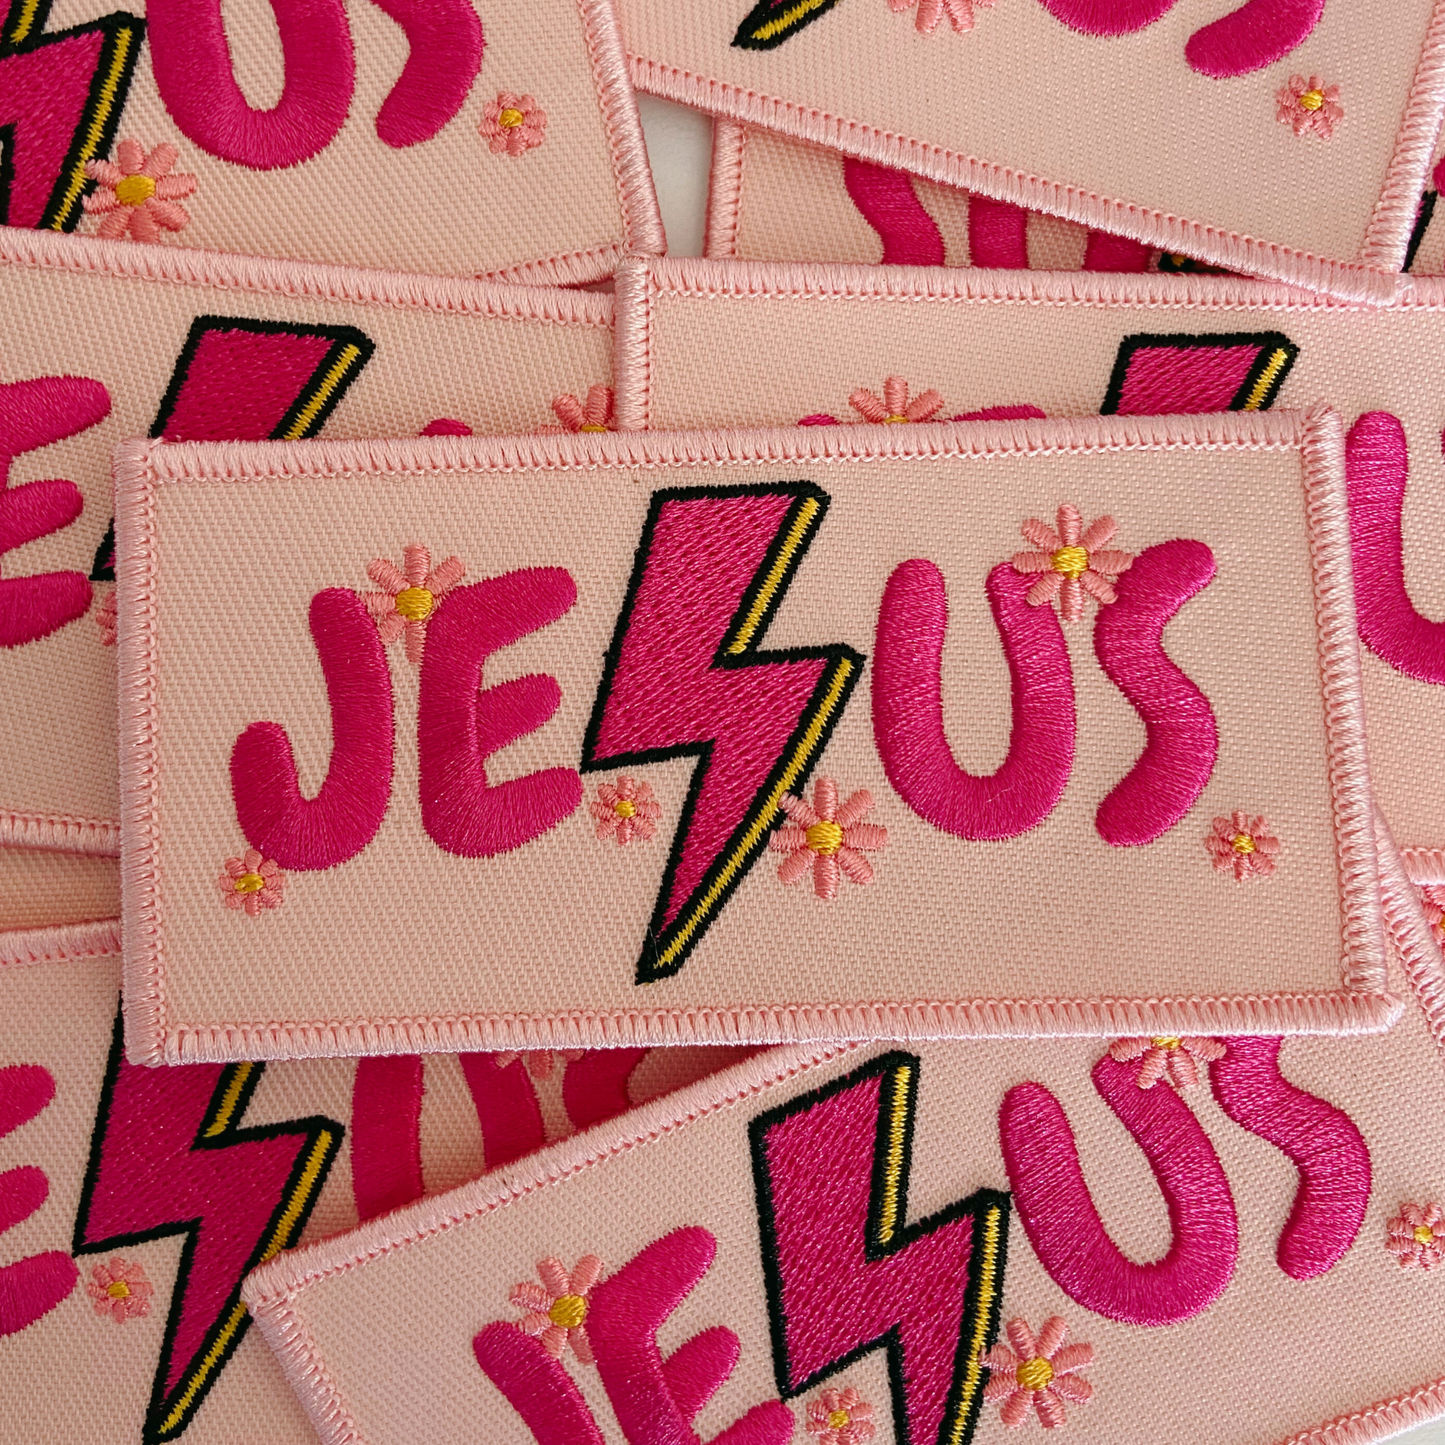 4" JESUS with Lightning and flowers -  Embroidered Hat Patch